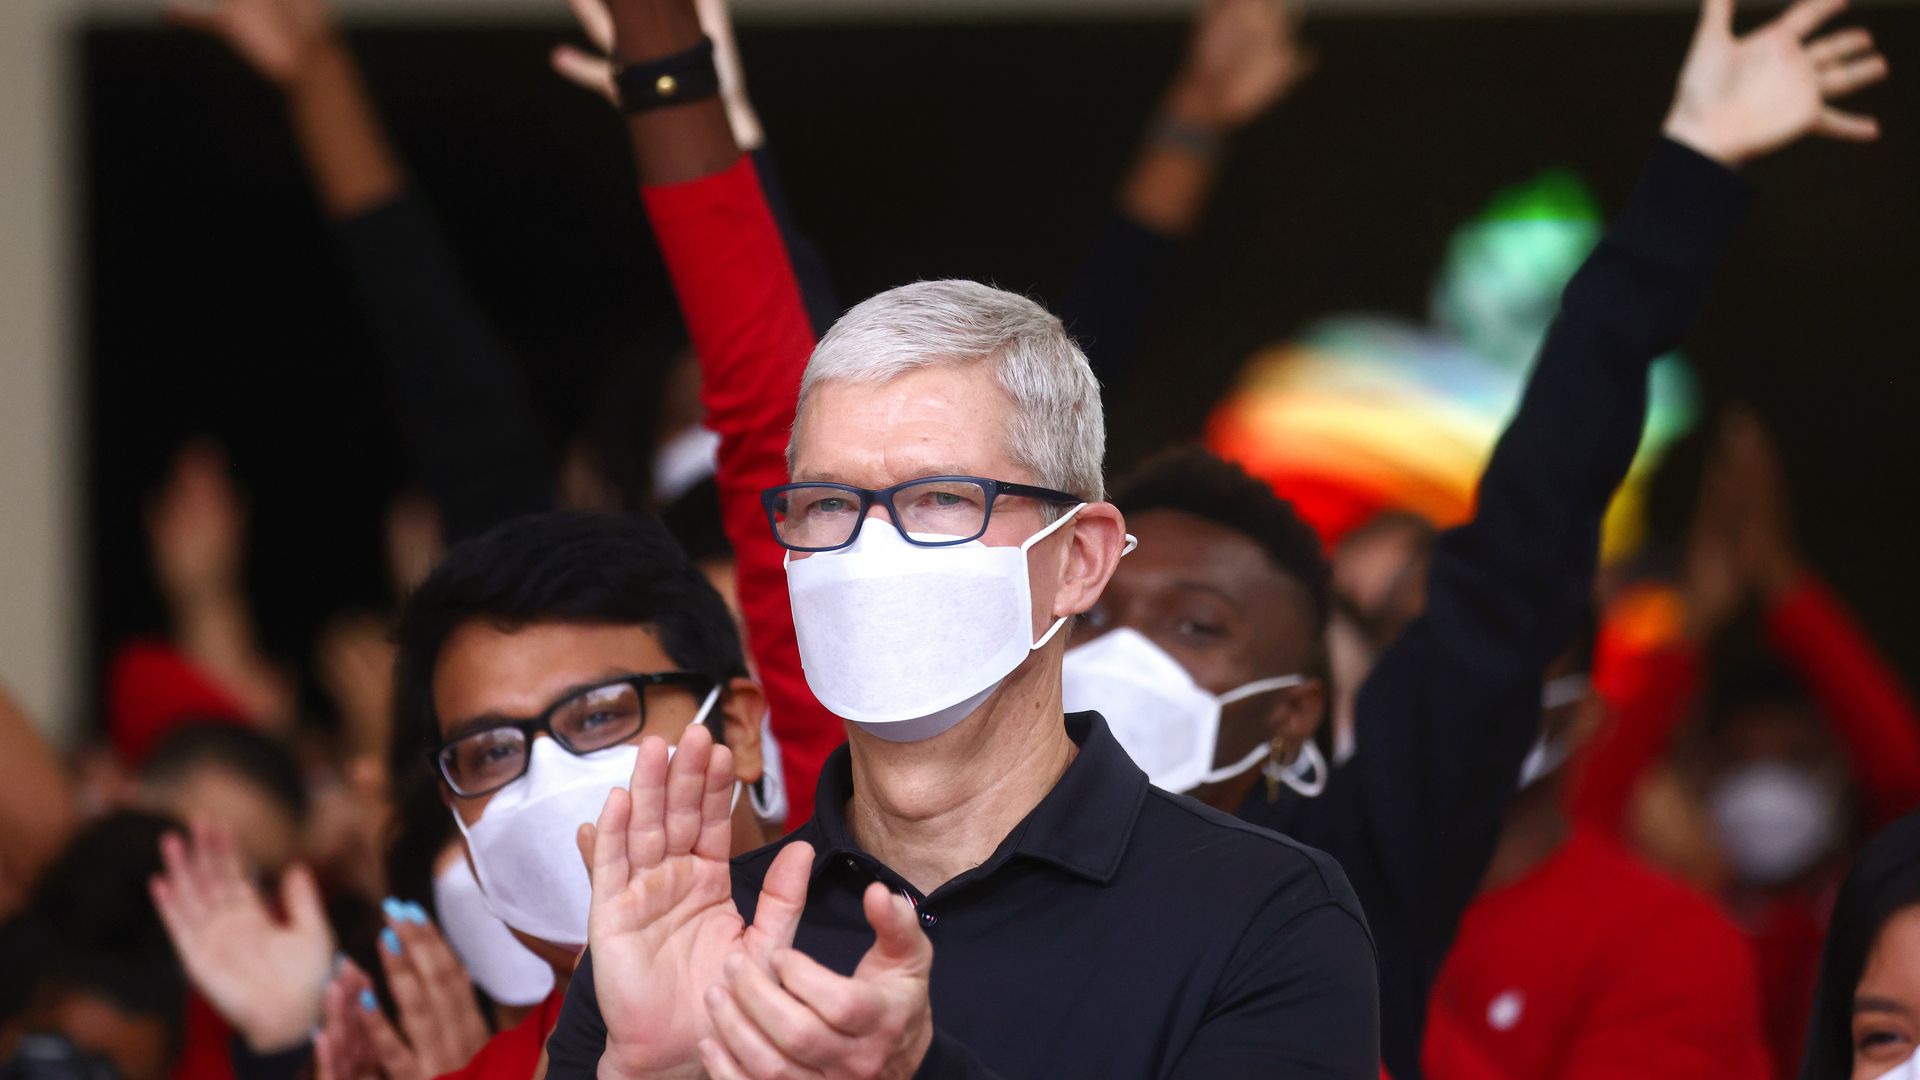 Apple CEO Tim Cook attends the grand opening event of the new Apple store at The Grove on November 19, 2021 in Los Angeles, California. 